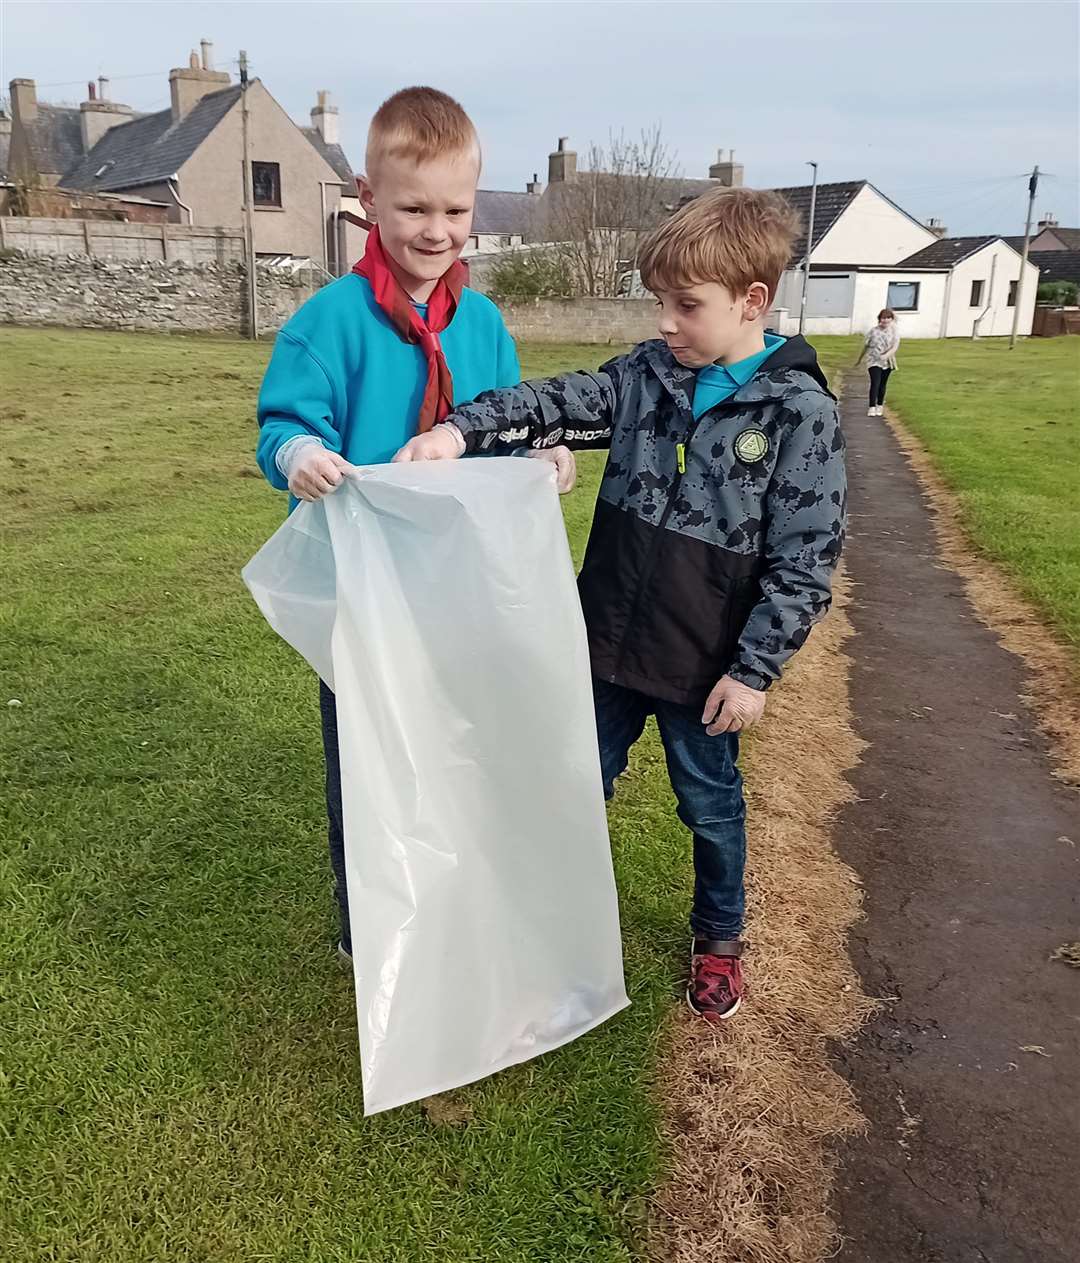 Two of the Beavers from 1st Wick Scout Group preparing to pick up litter in the Green Road play park.